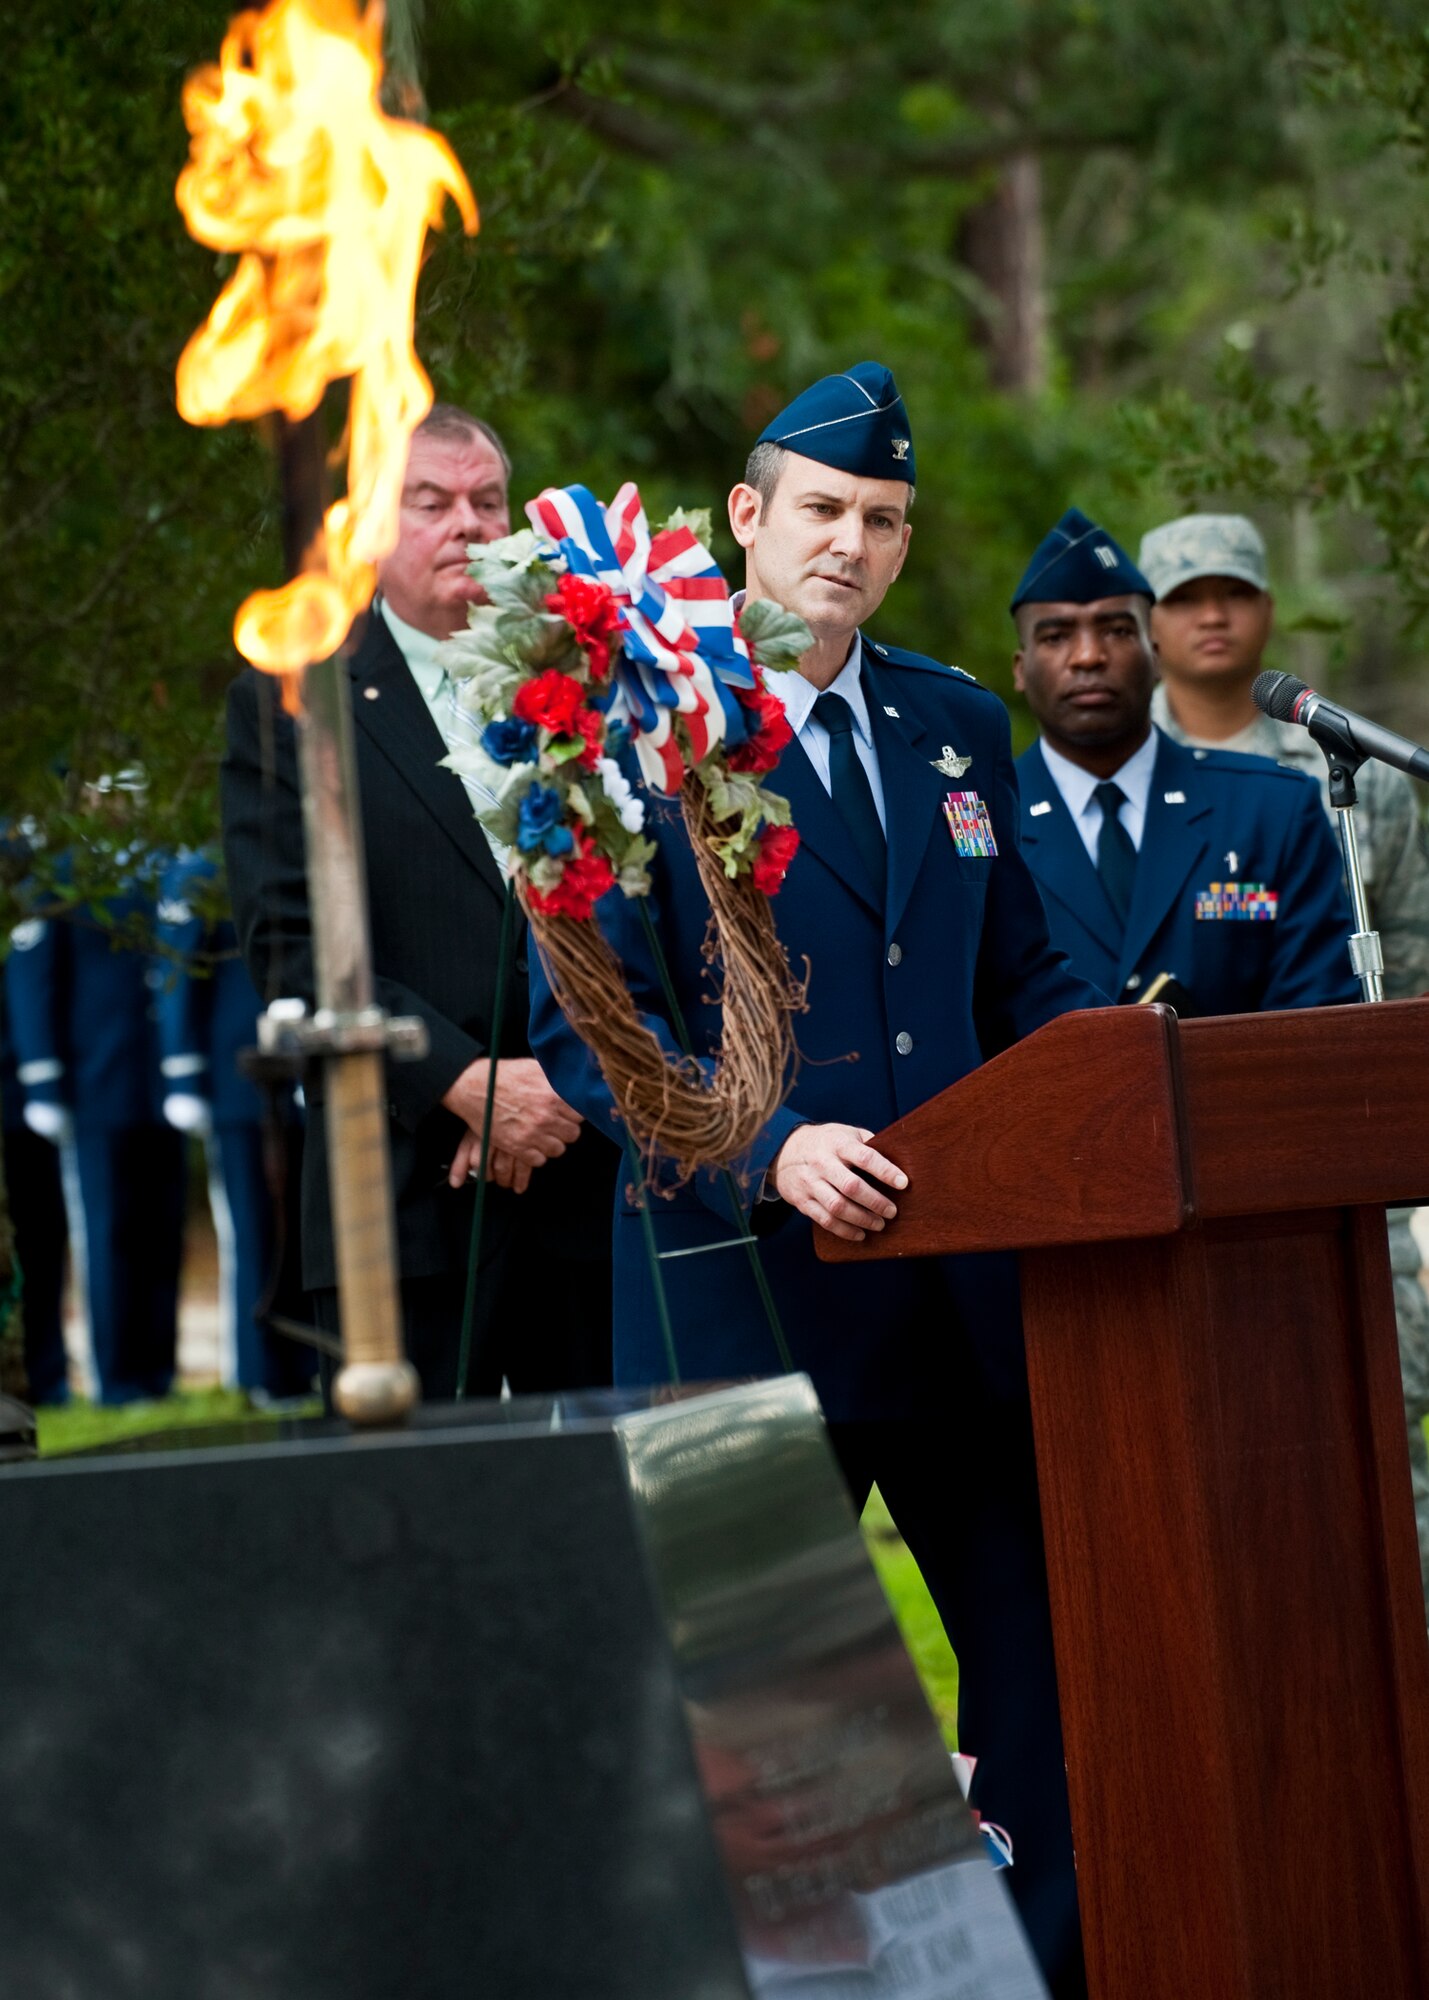 Col. Andrew Toth, the 33rd Fighter Wing commander, addresses the families of the victims of the Khobar Towers bombing during a memorial ceremony June 24, 2011, at Eglin Air Force Base, Fla. June 25 marks the 15th anniversary of the bombing. (U.S. Air Force photo/Samuel King Jr.)